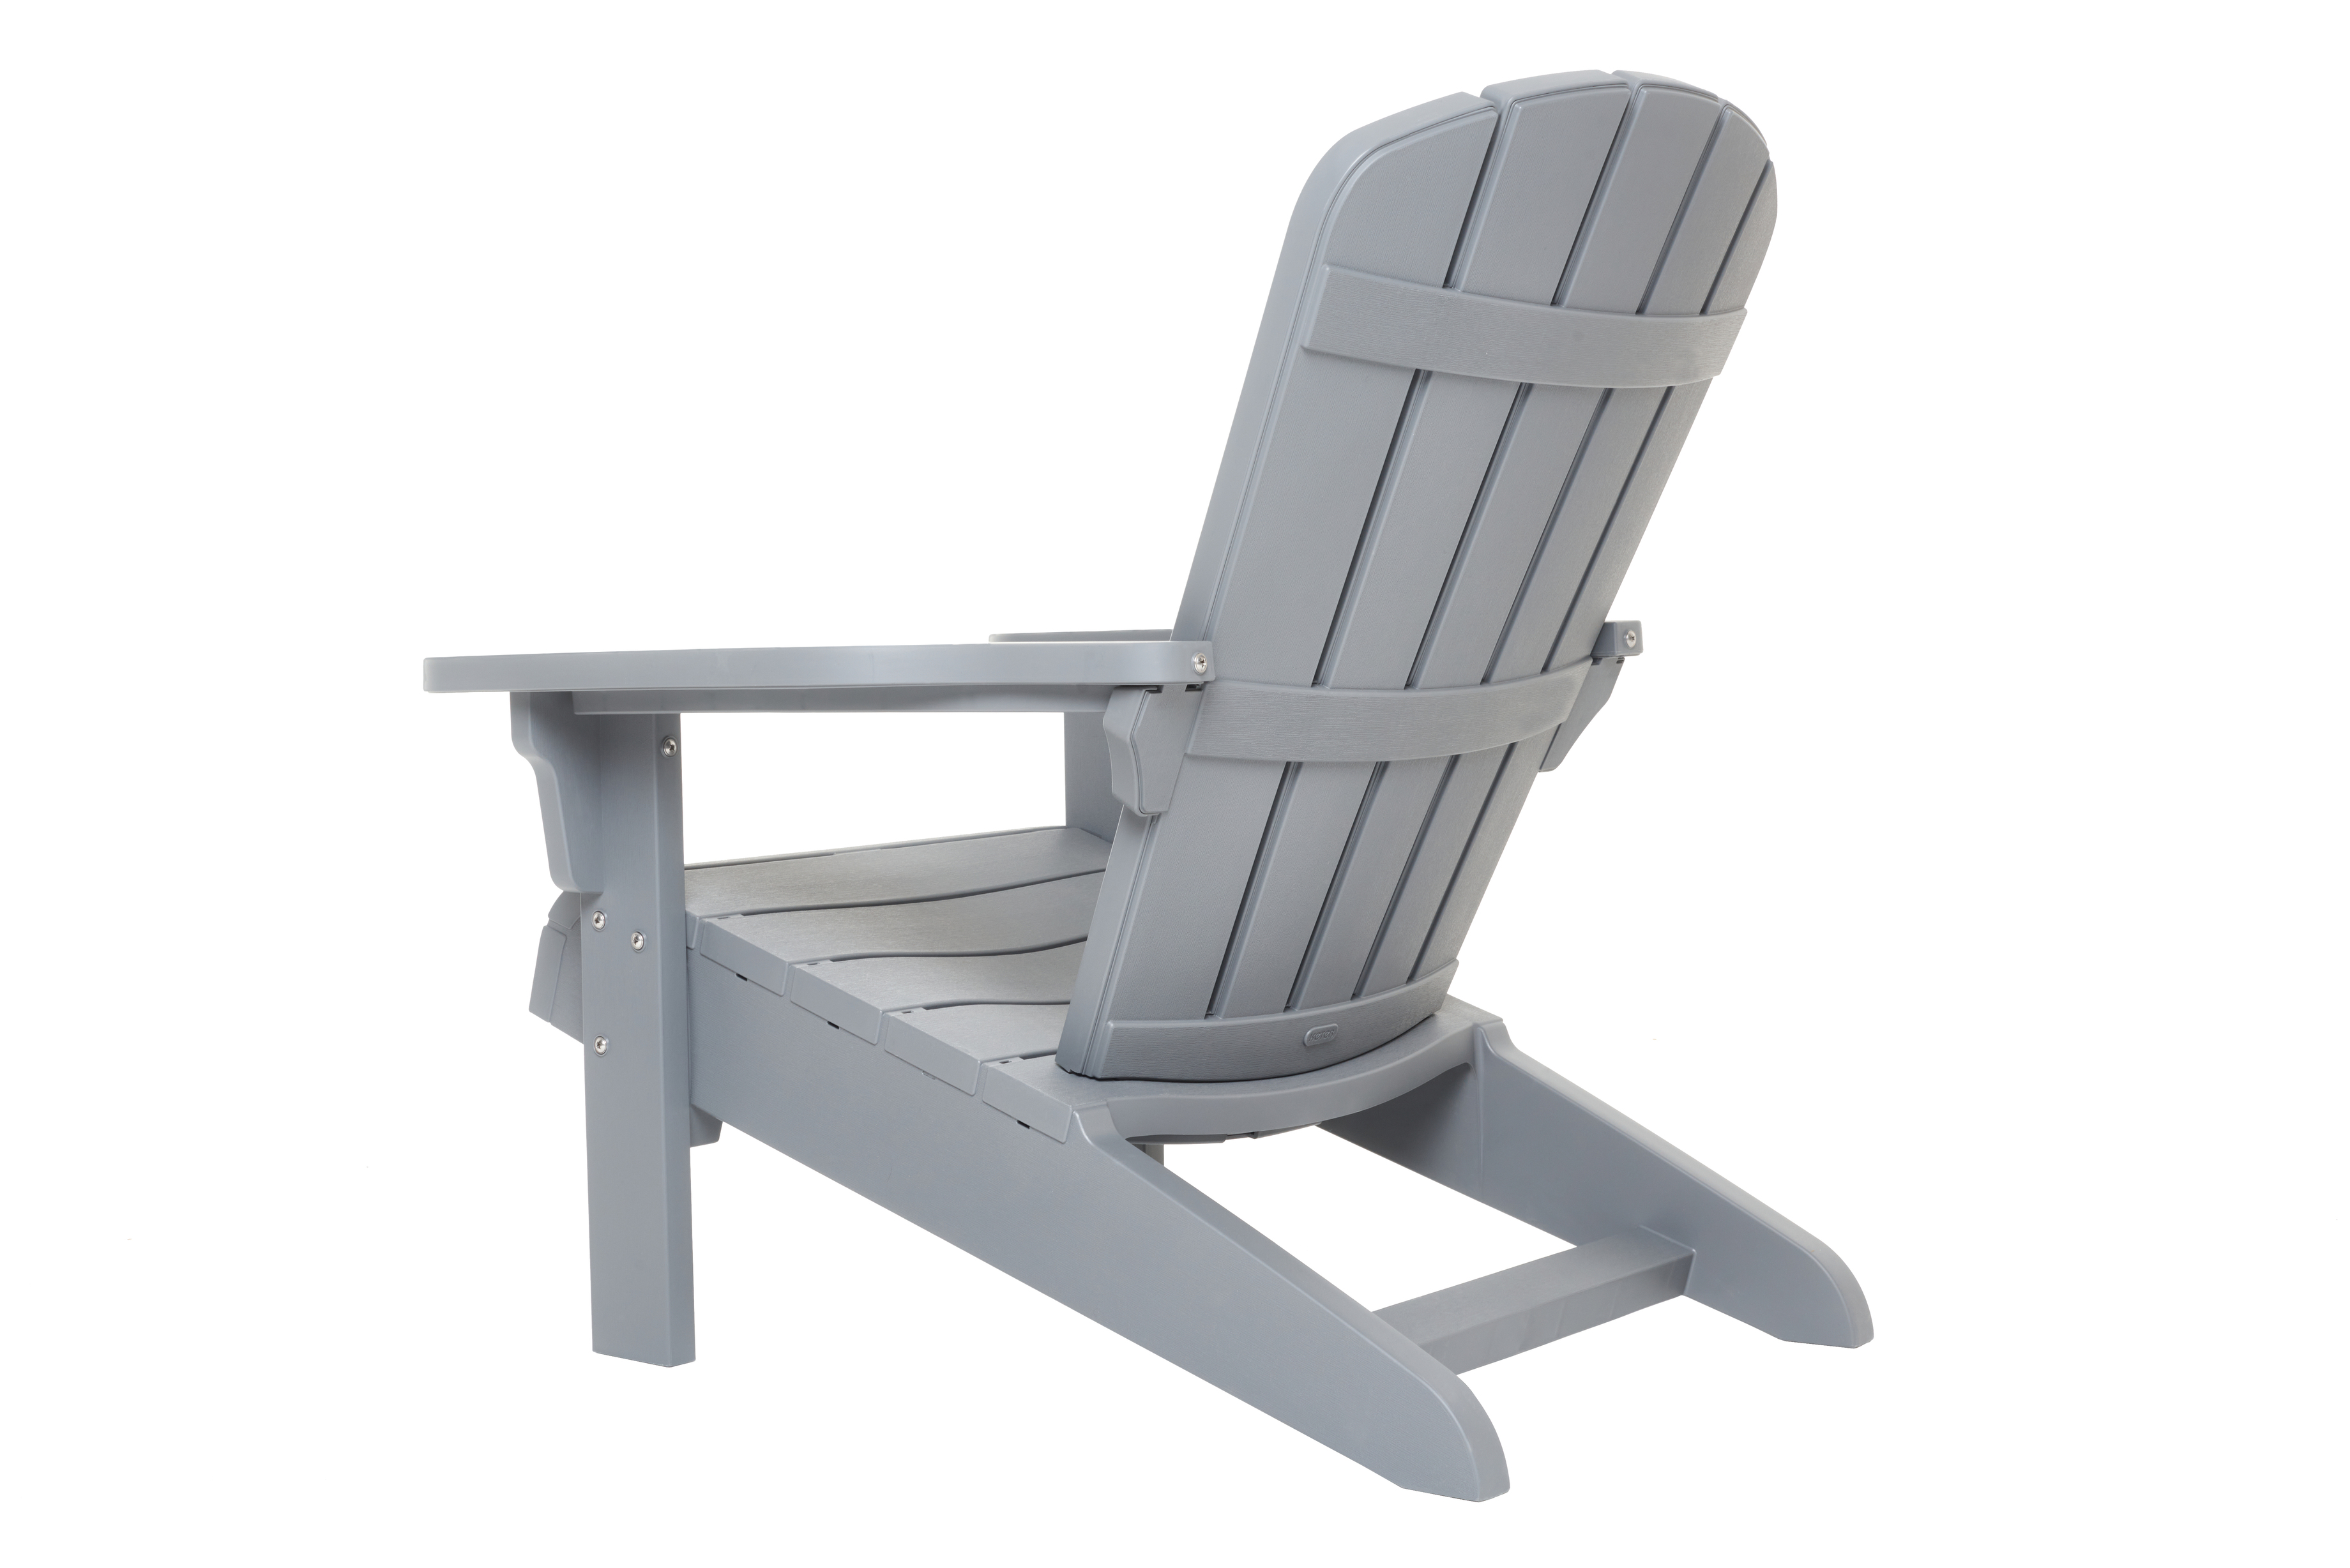 Keter Adirondack Chair, Resin Outdoor Furniture, Gray - image 3 of 7